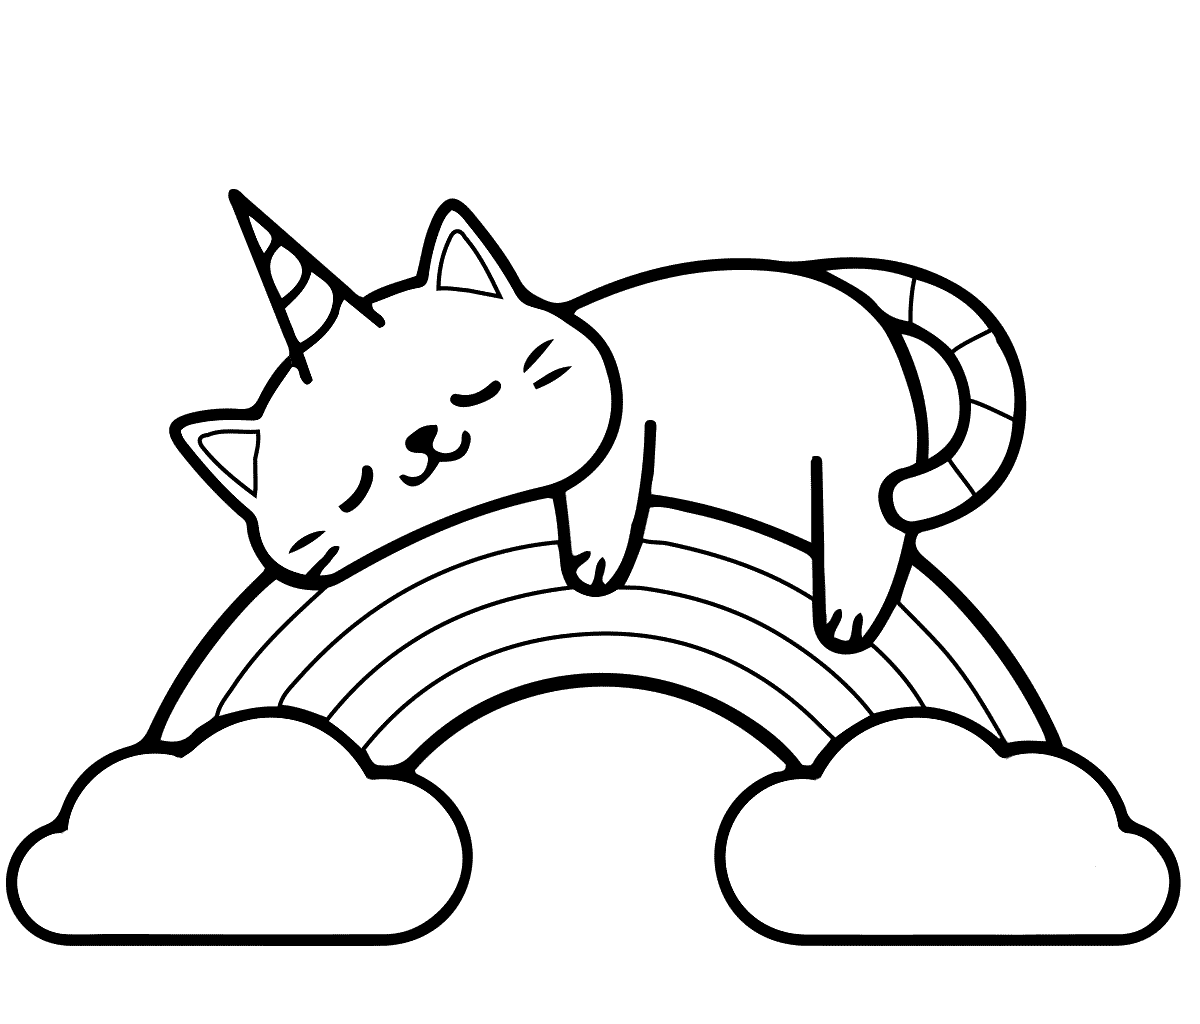 Unicorn cat lies on the rainbow Coloring Page